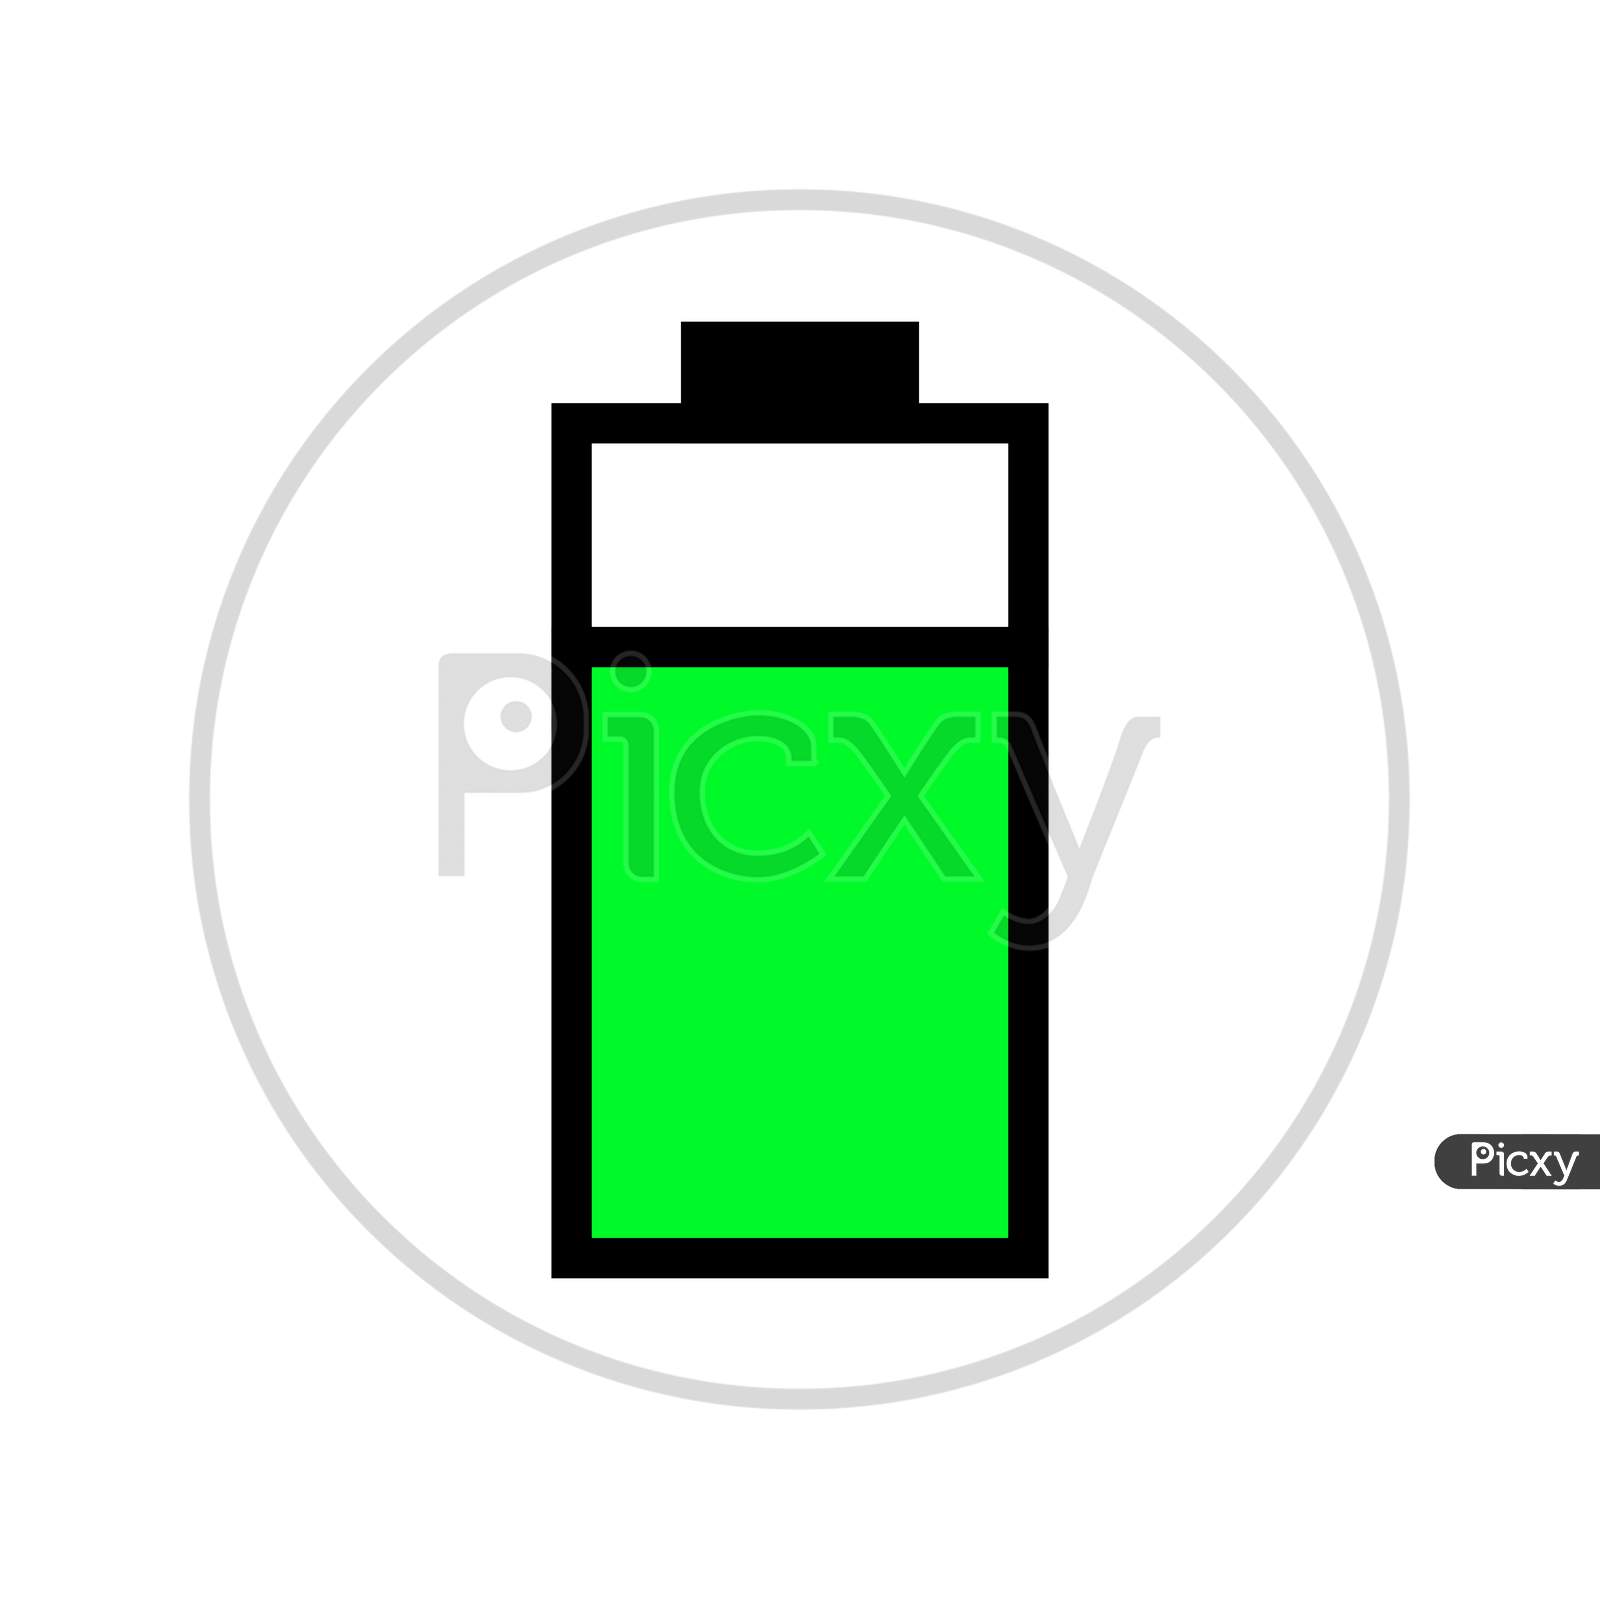 Battery Vector Icon. Concept Of Battery Charge. Modern, Simple Flat Vector Illustration For Web Site Or Mobile App